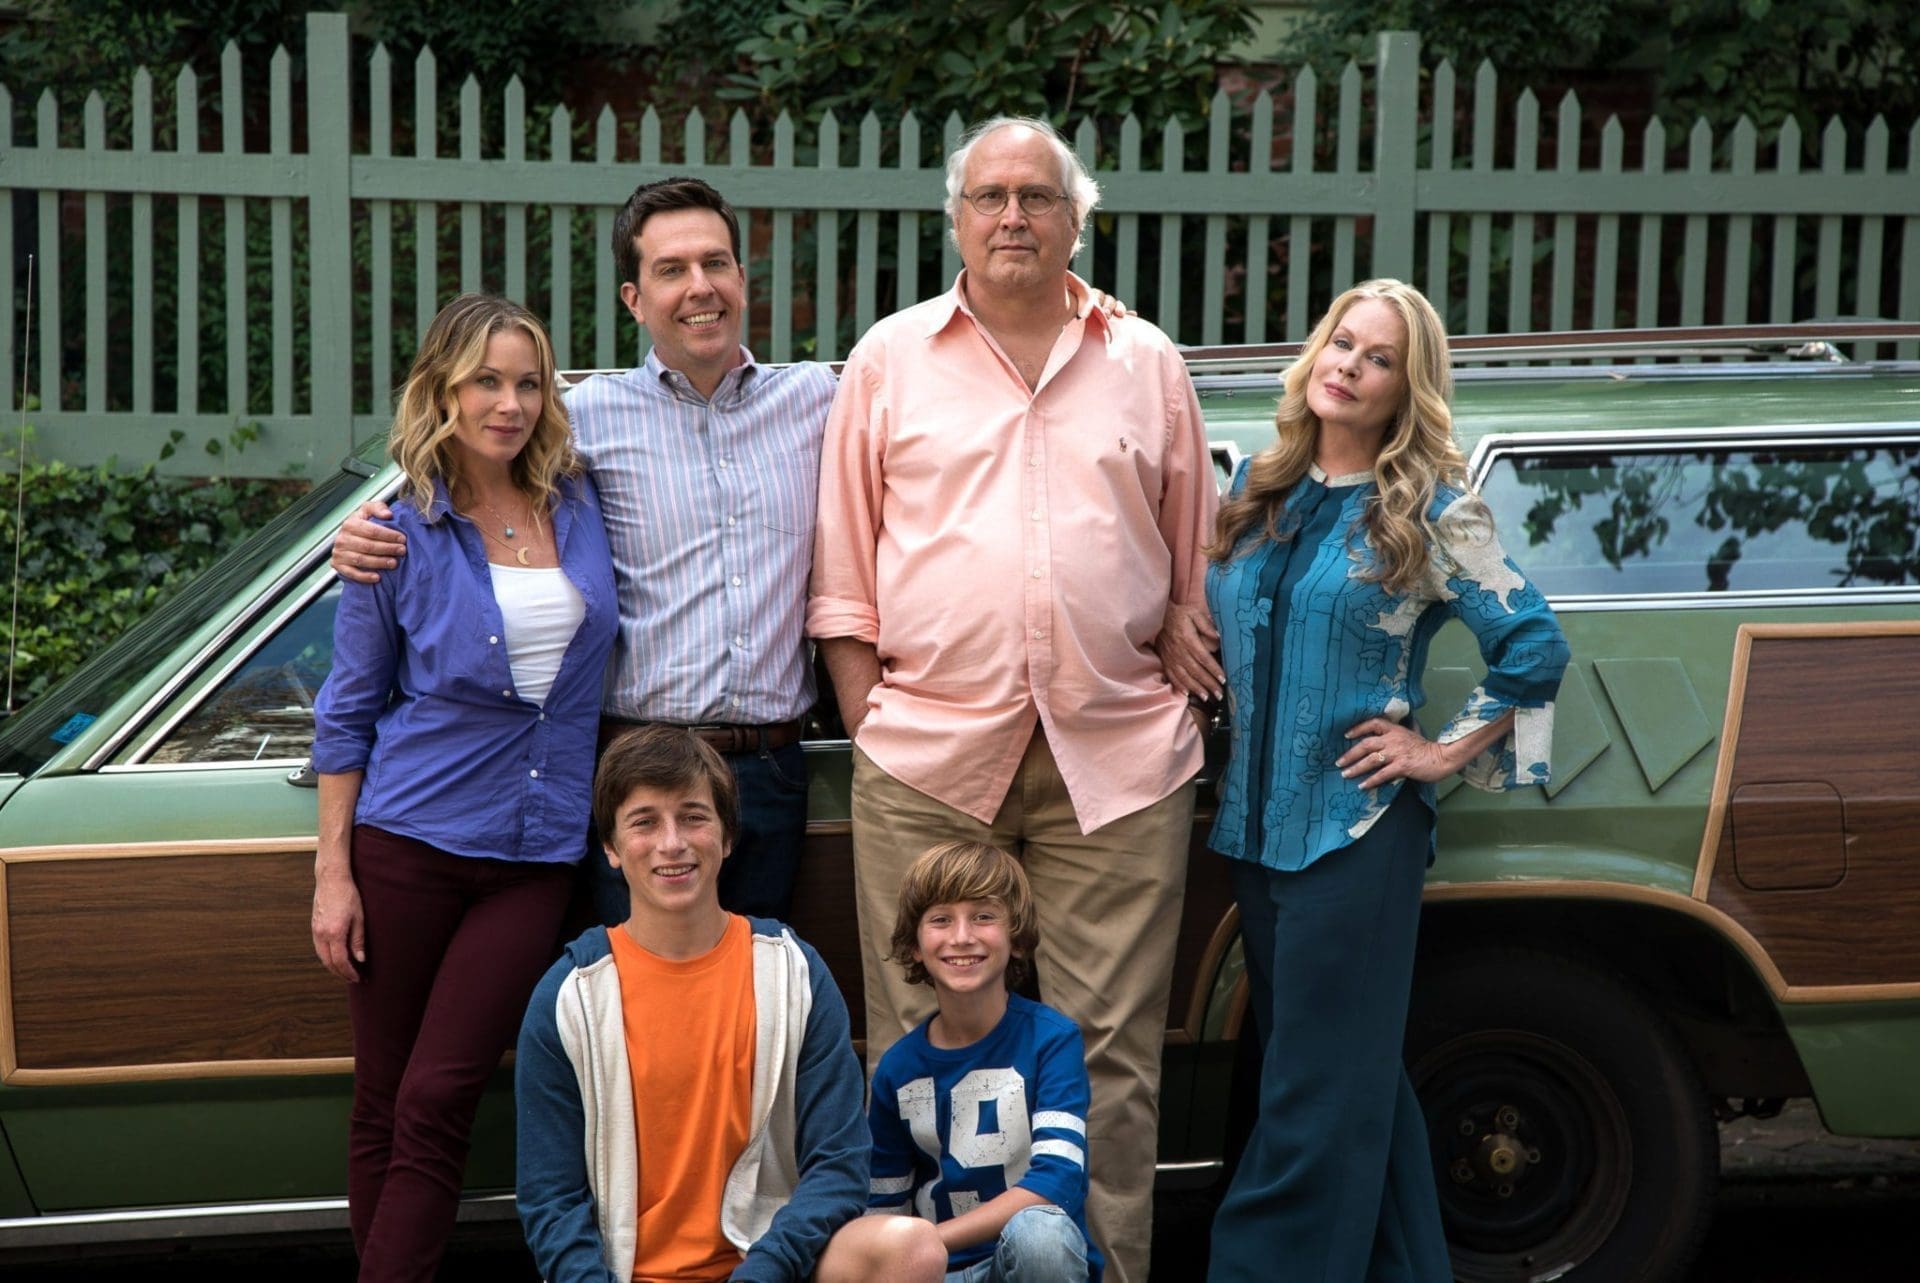 Photo Credit: Hopper Stone (L-R) CHRISTINA APPLEGATE as Debbie Griswold, SKYLER GISONDO as James Griswold, ED HELMS as Rusty Griswold, STEELE STEBBINS as Kevin Griswold, CHEVY CHASE as Clark Griswold and BEVERLY D'ANGELO as Ellen Griswold in New Line Cinema's comedy "VACATION," a Warner Bros. Pictures release.